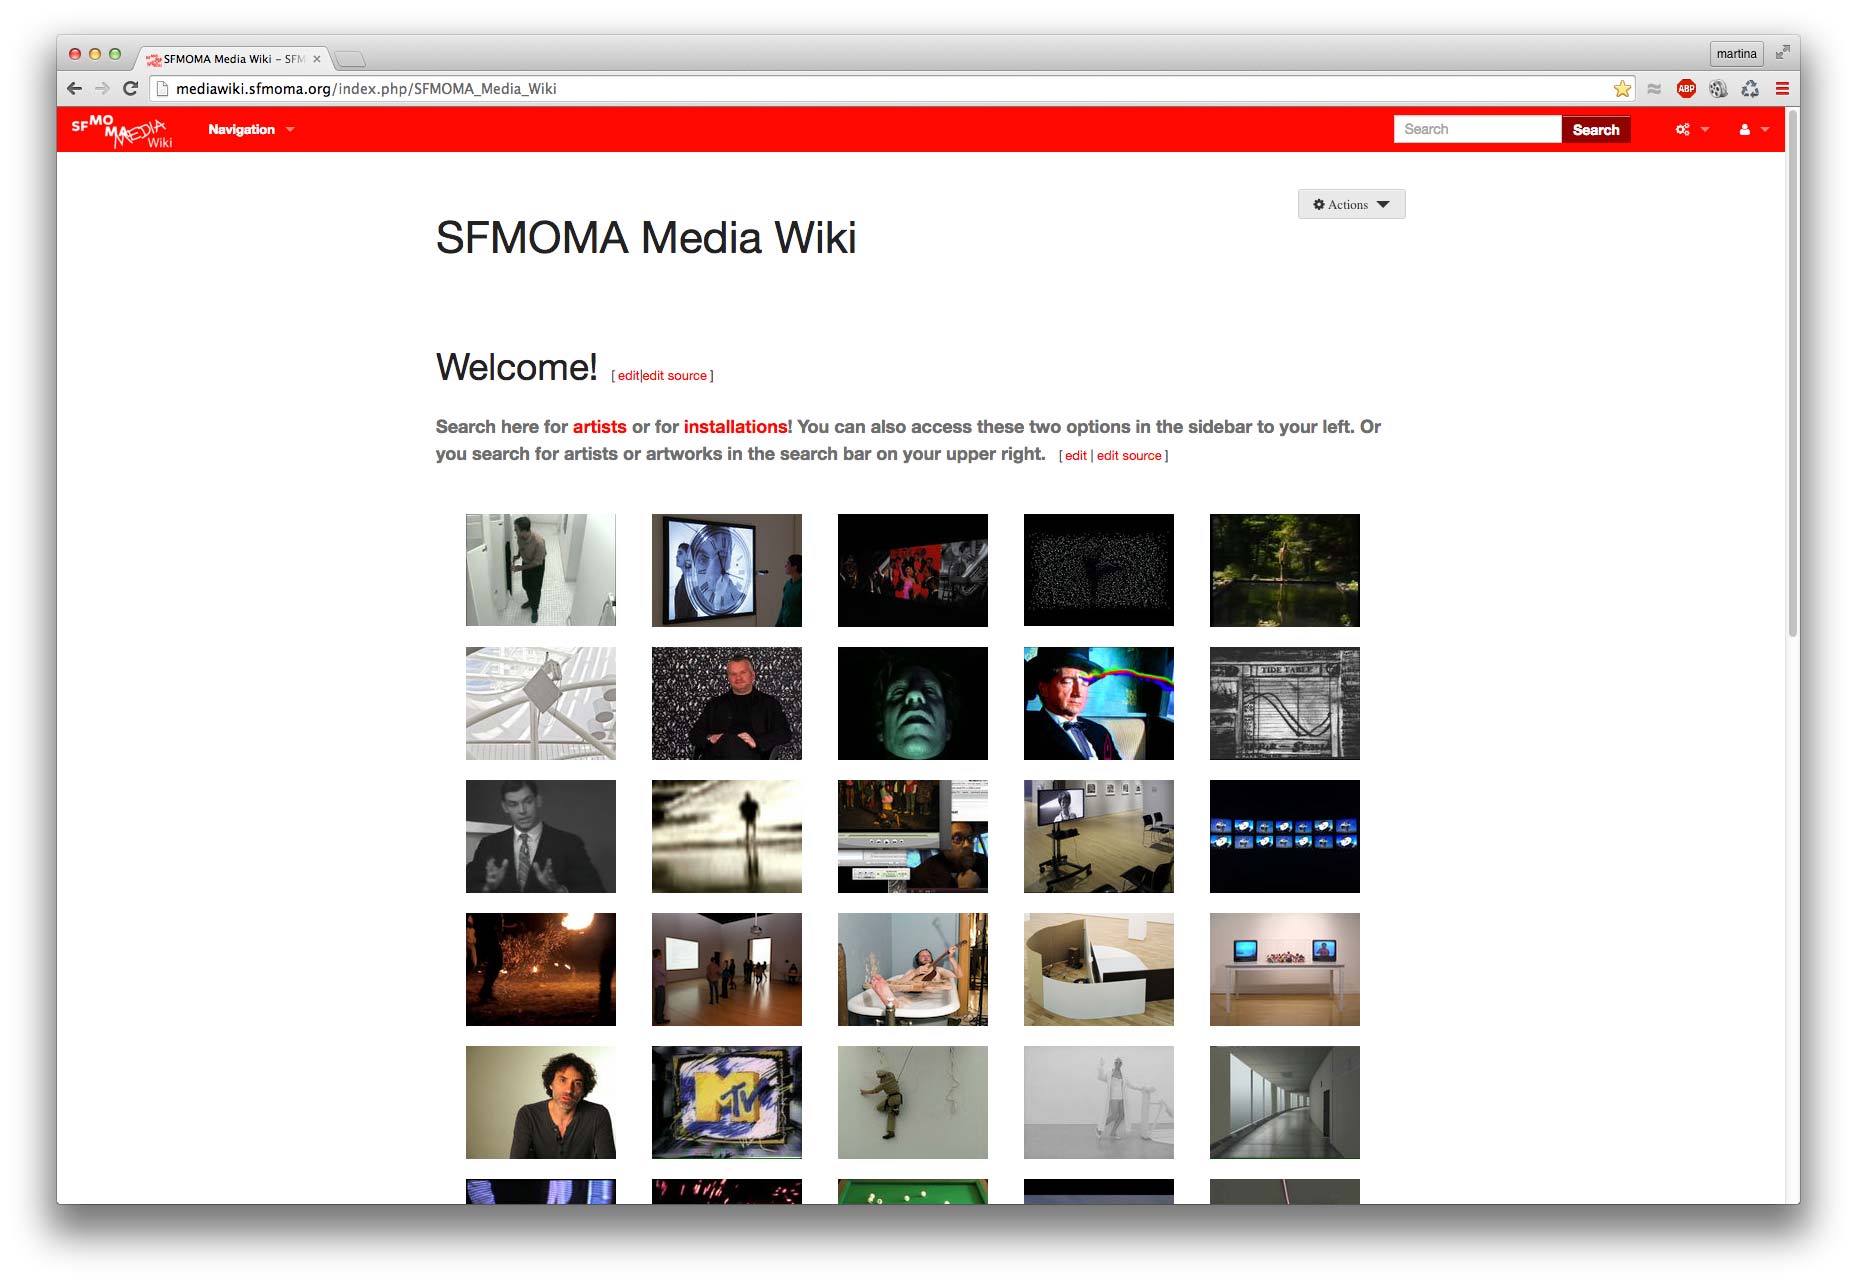 Figure 4. Homepage of SFMOMA’s MediaWiki after its design overhaul in 2016.